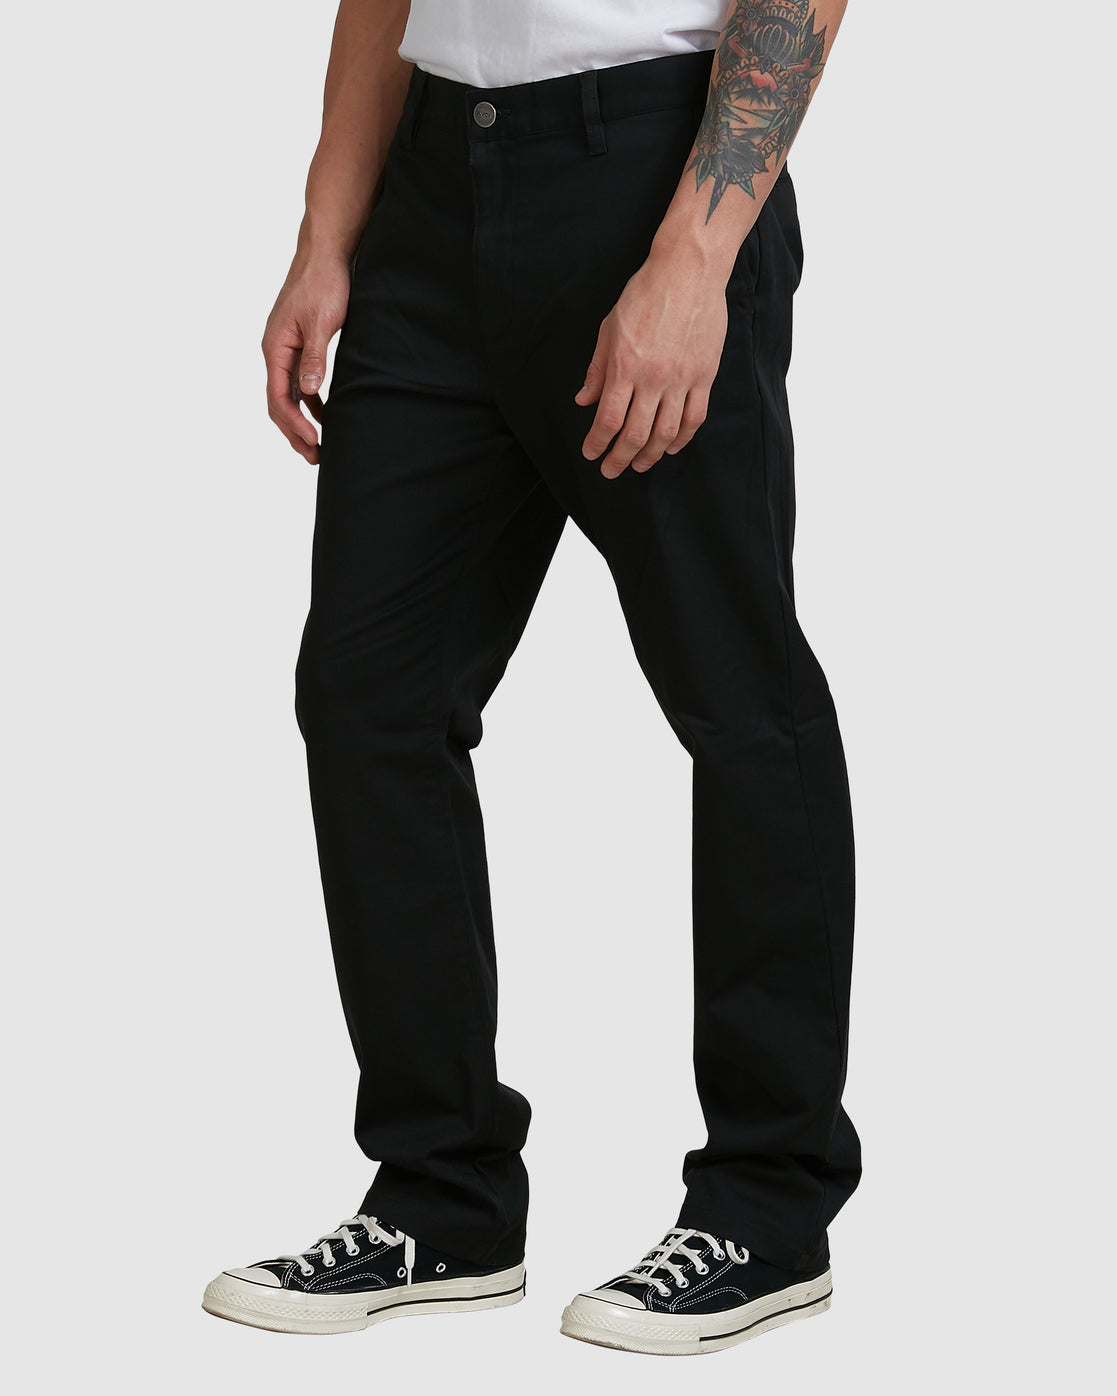 THE WEEKEND STRETECH PANT